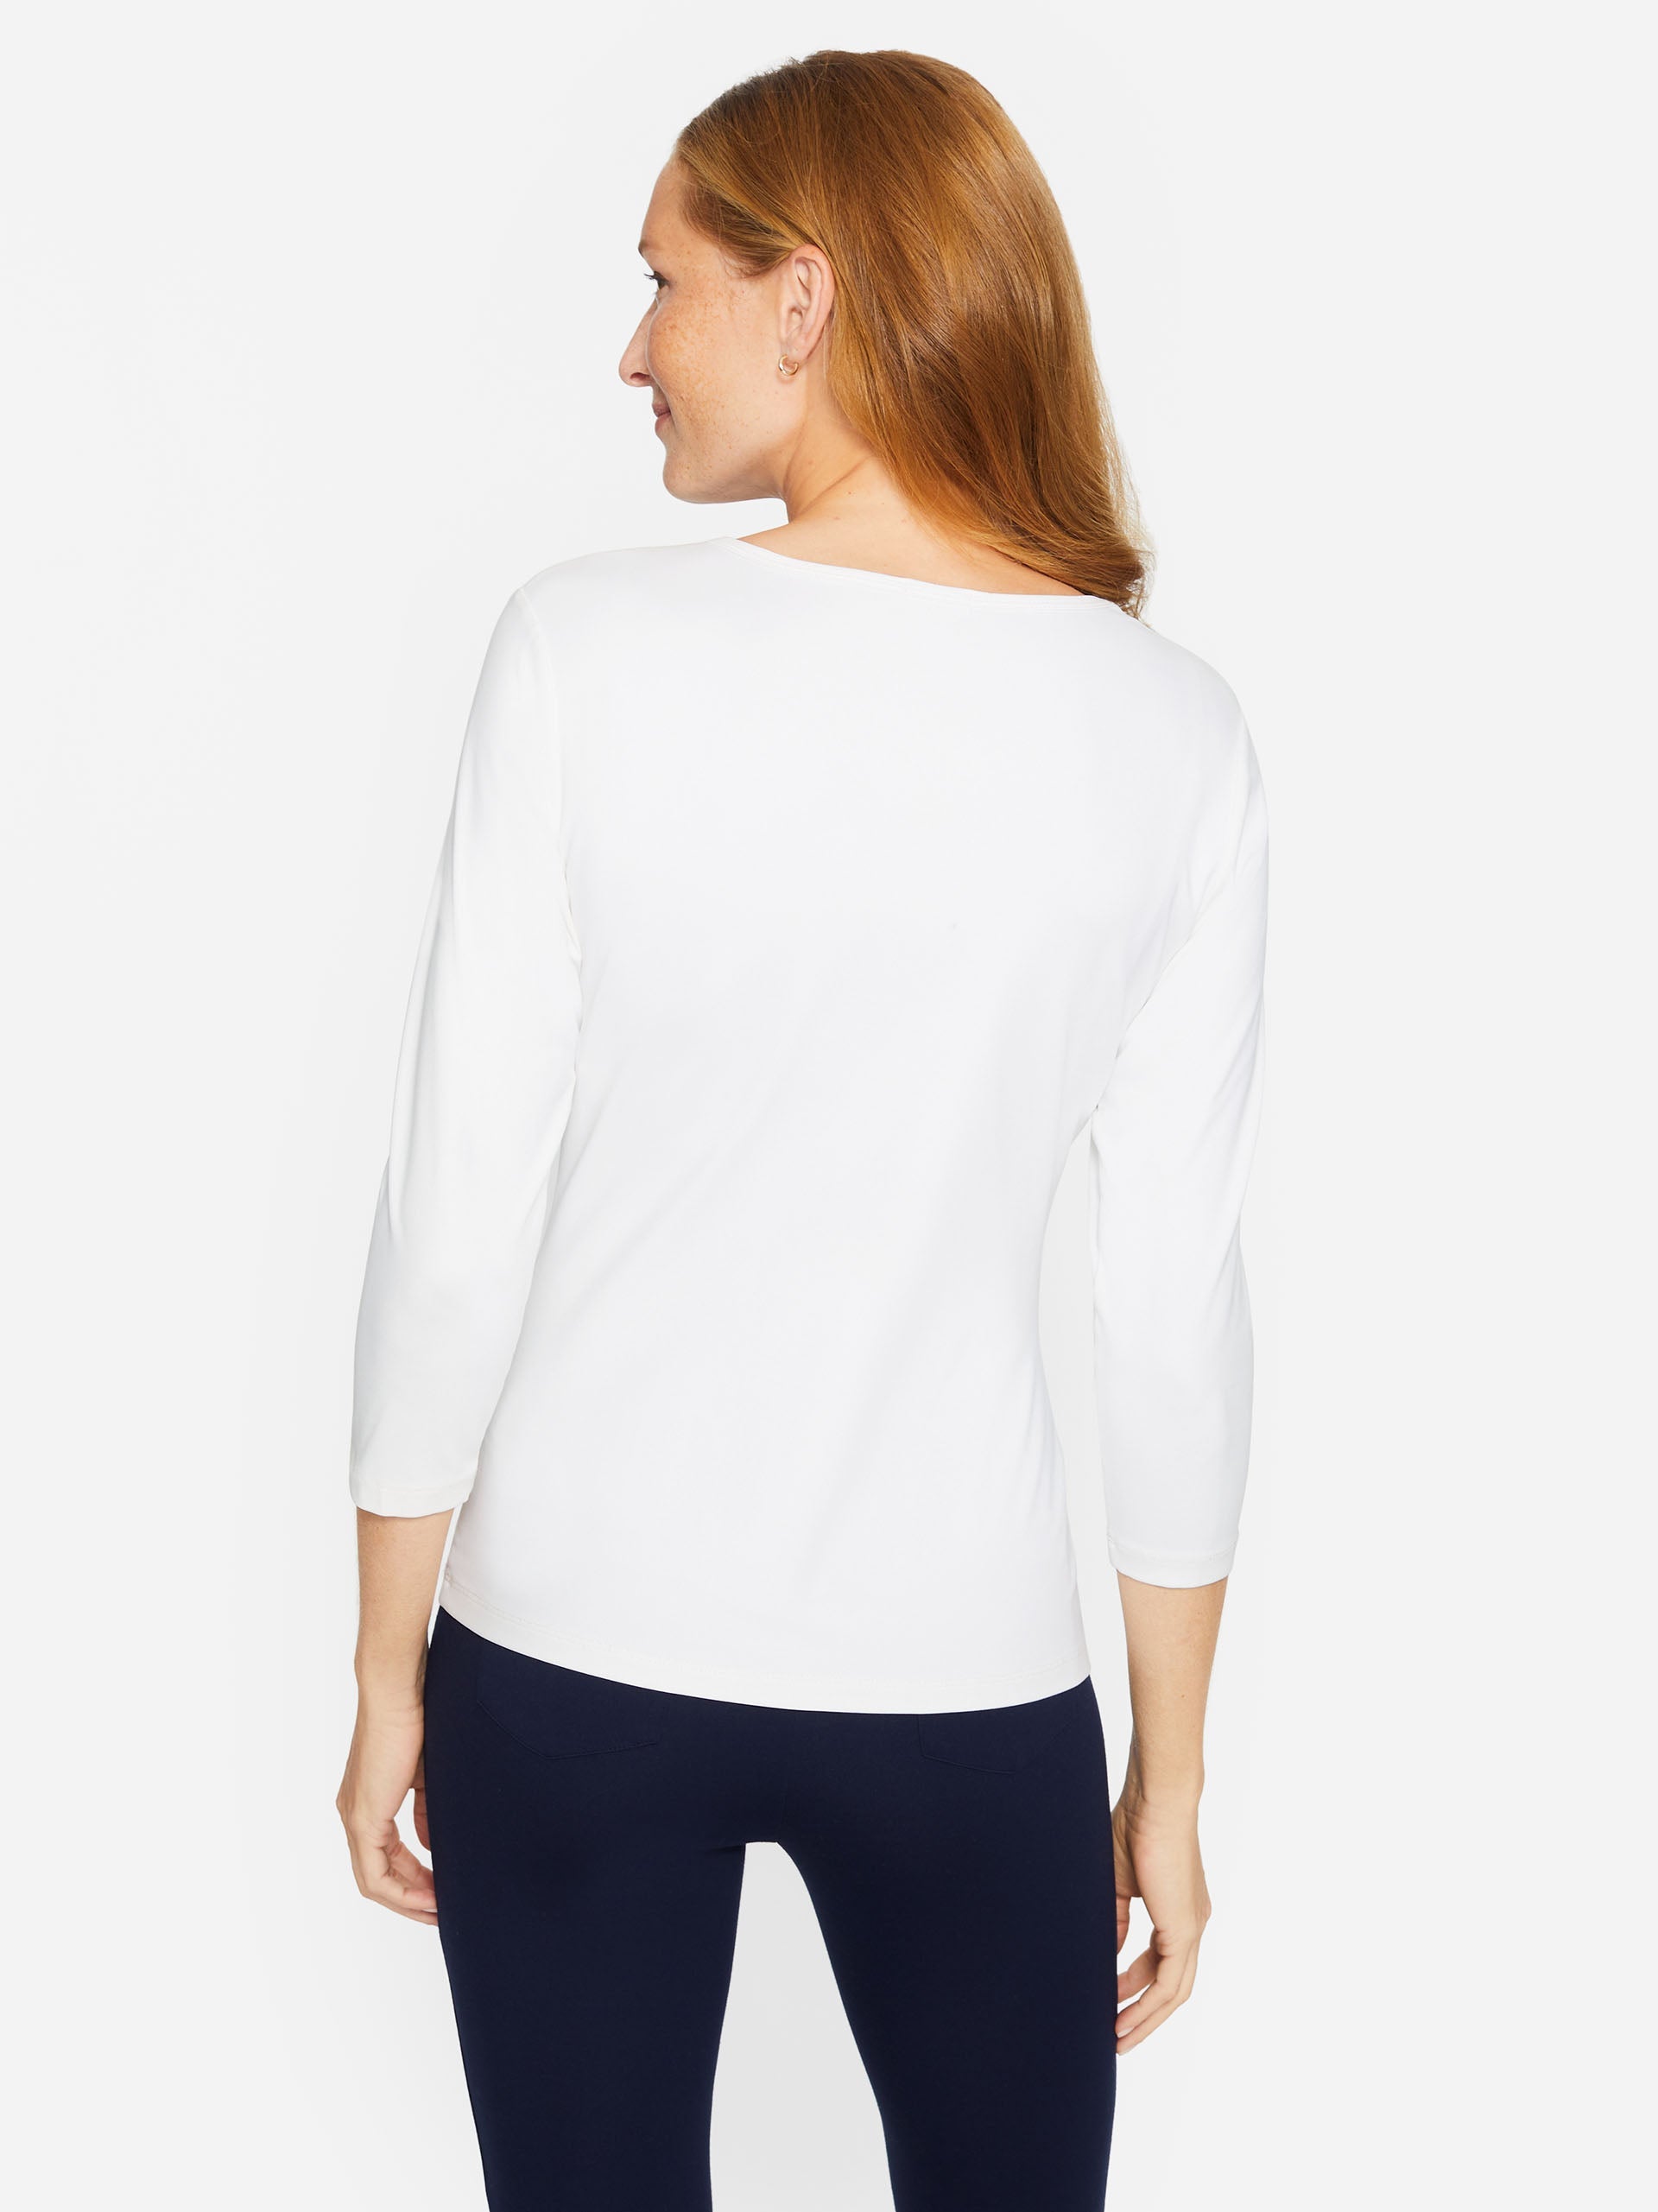 White Solid Signature Tee, Women's Tops